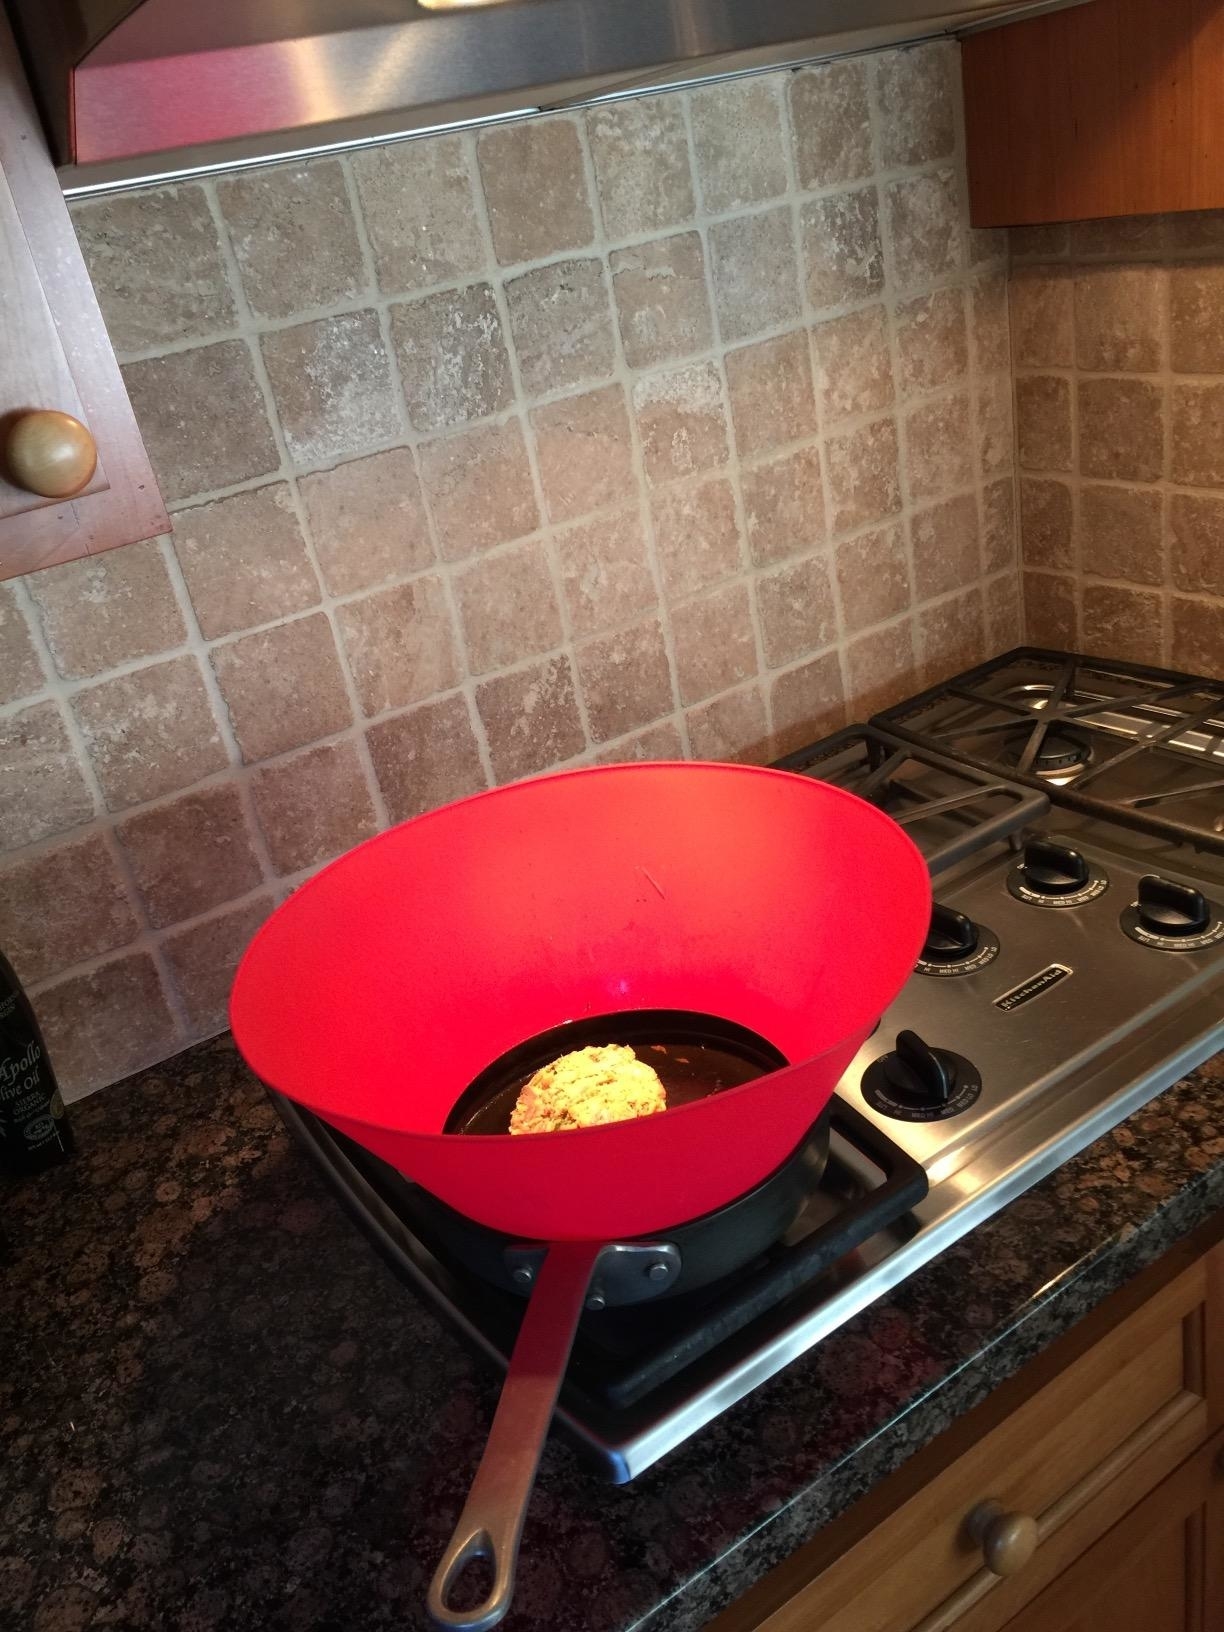 Red skillet on a stove with food cooking, in a kitchen. Ideal for home chefs looking to upgrade their cookware